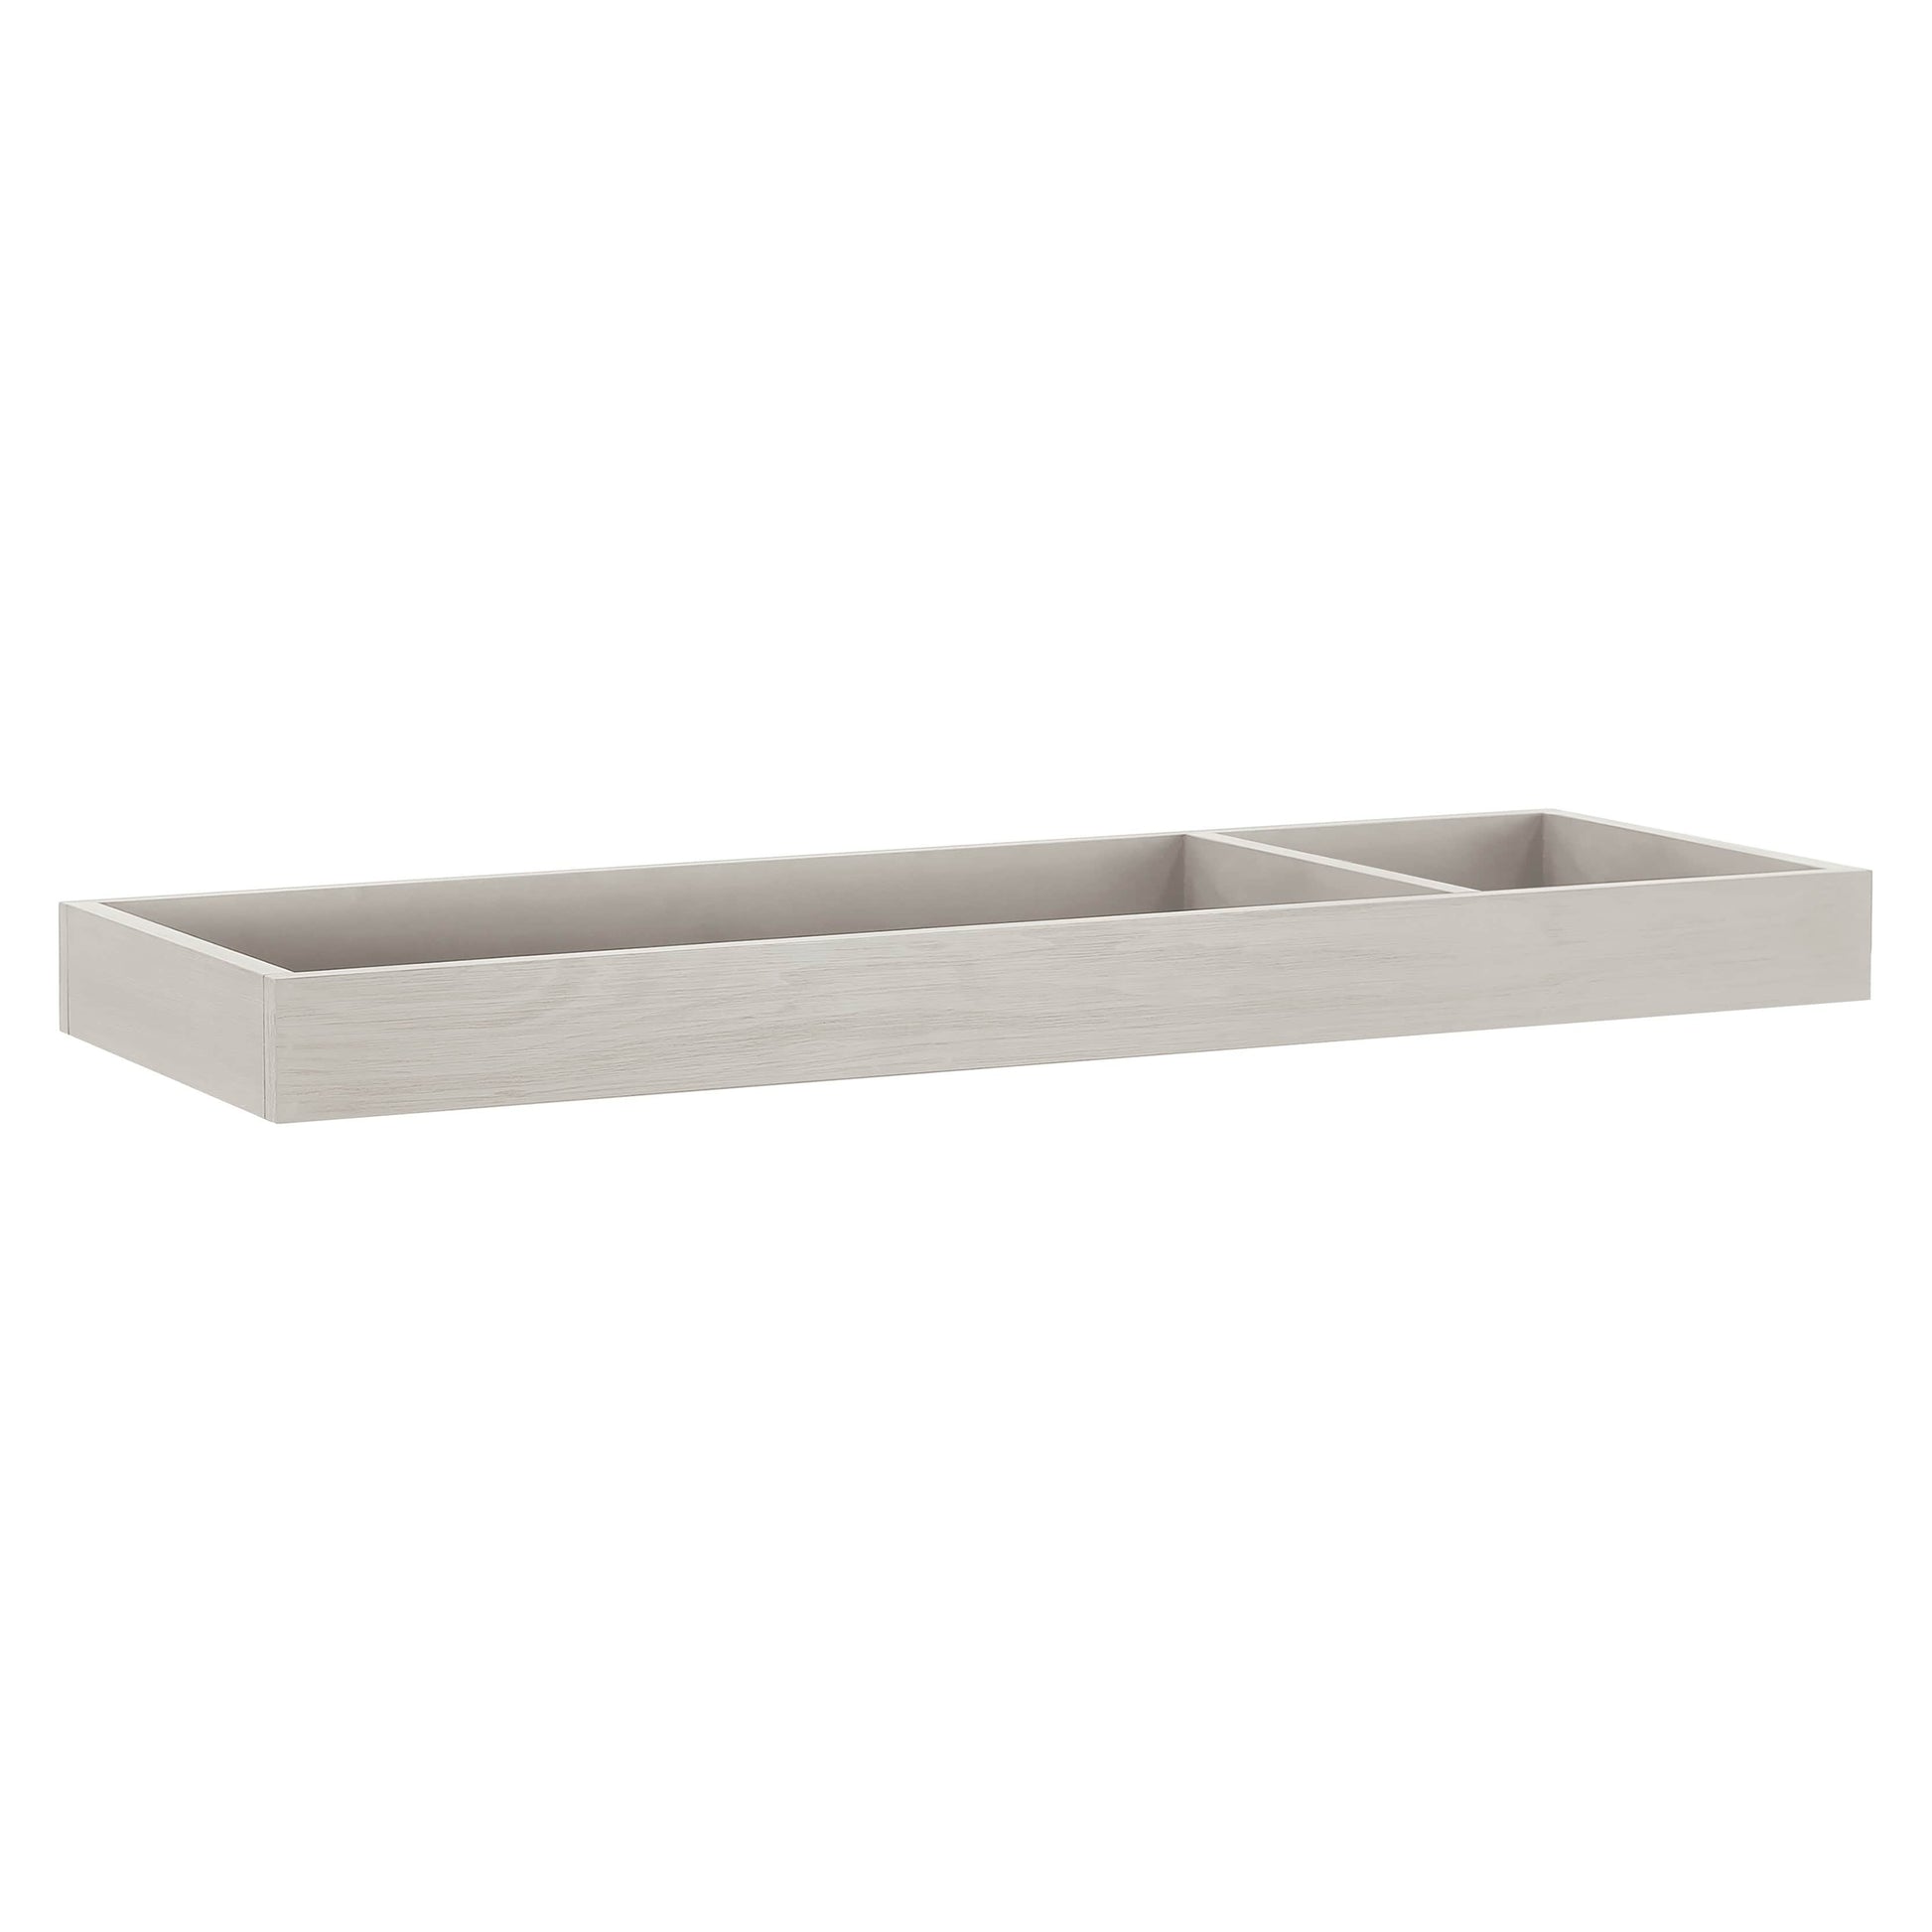 M0619LF,Universal Wide Removable Changing Tray in London Fog